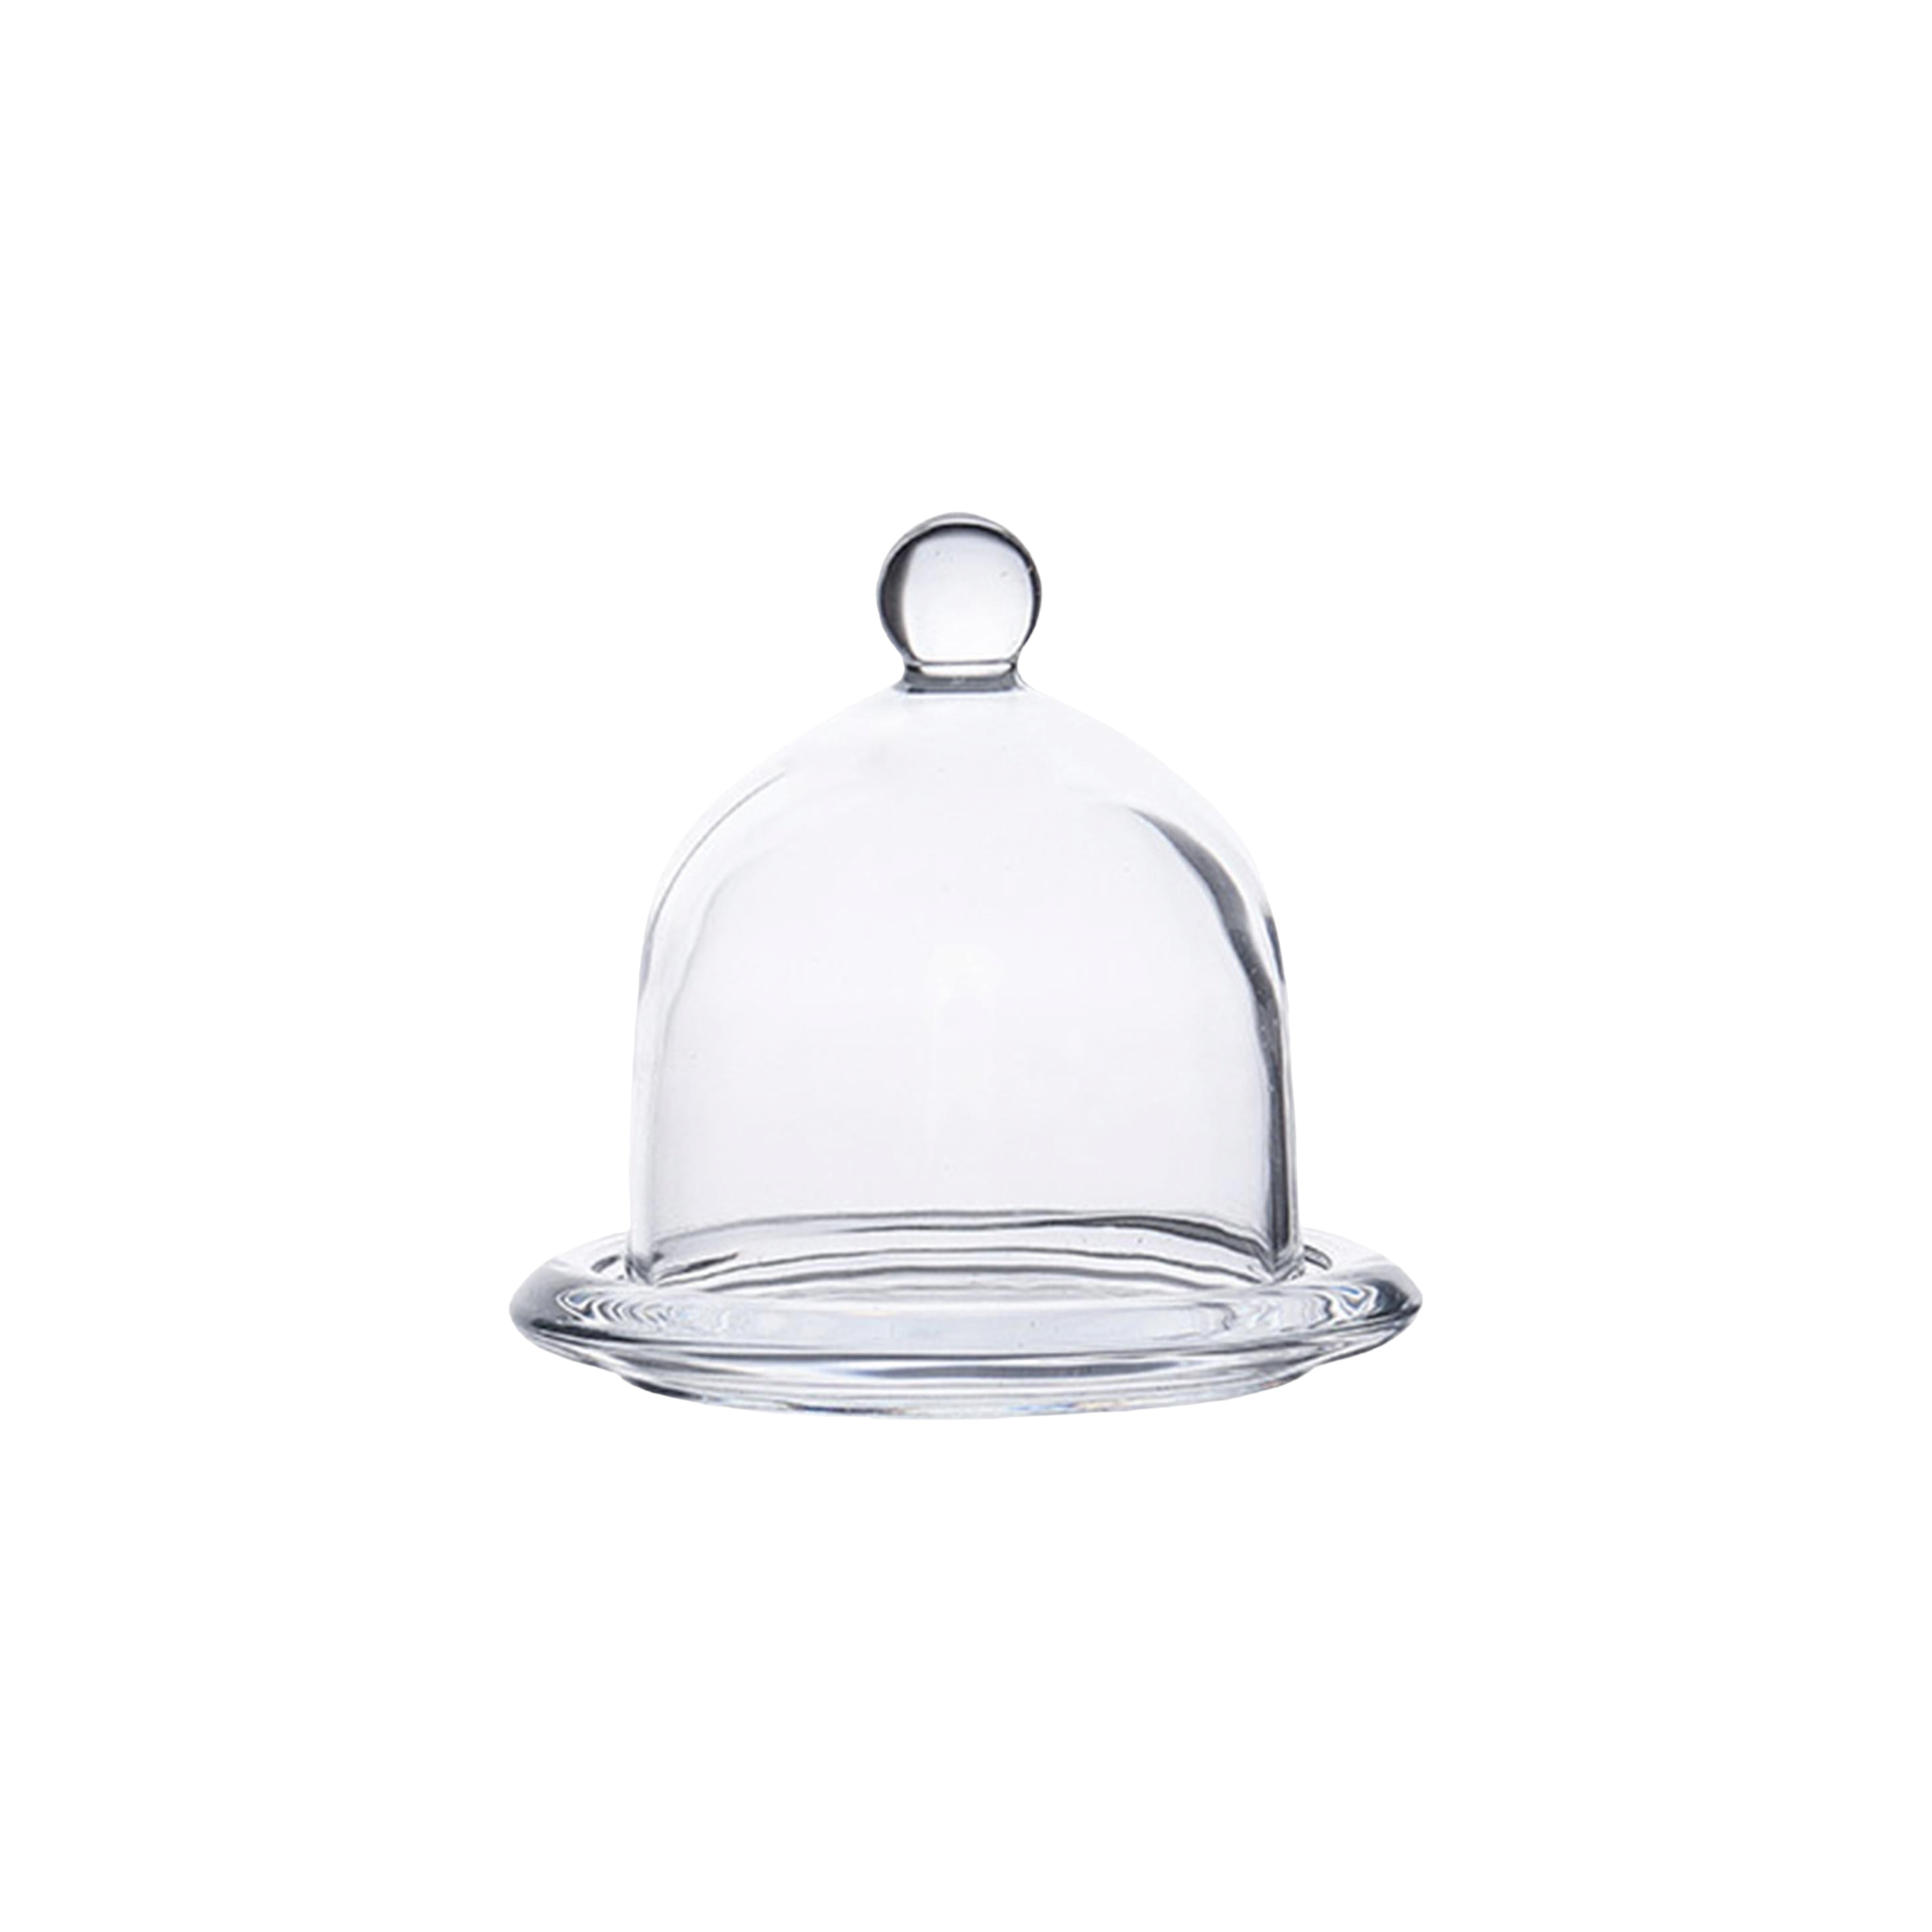 Patisserie Cupcake Mini Glass Cake Dome 9.5x9cm with Serving Base Tray 34561